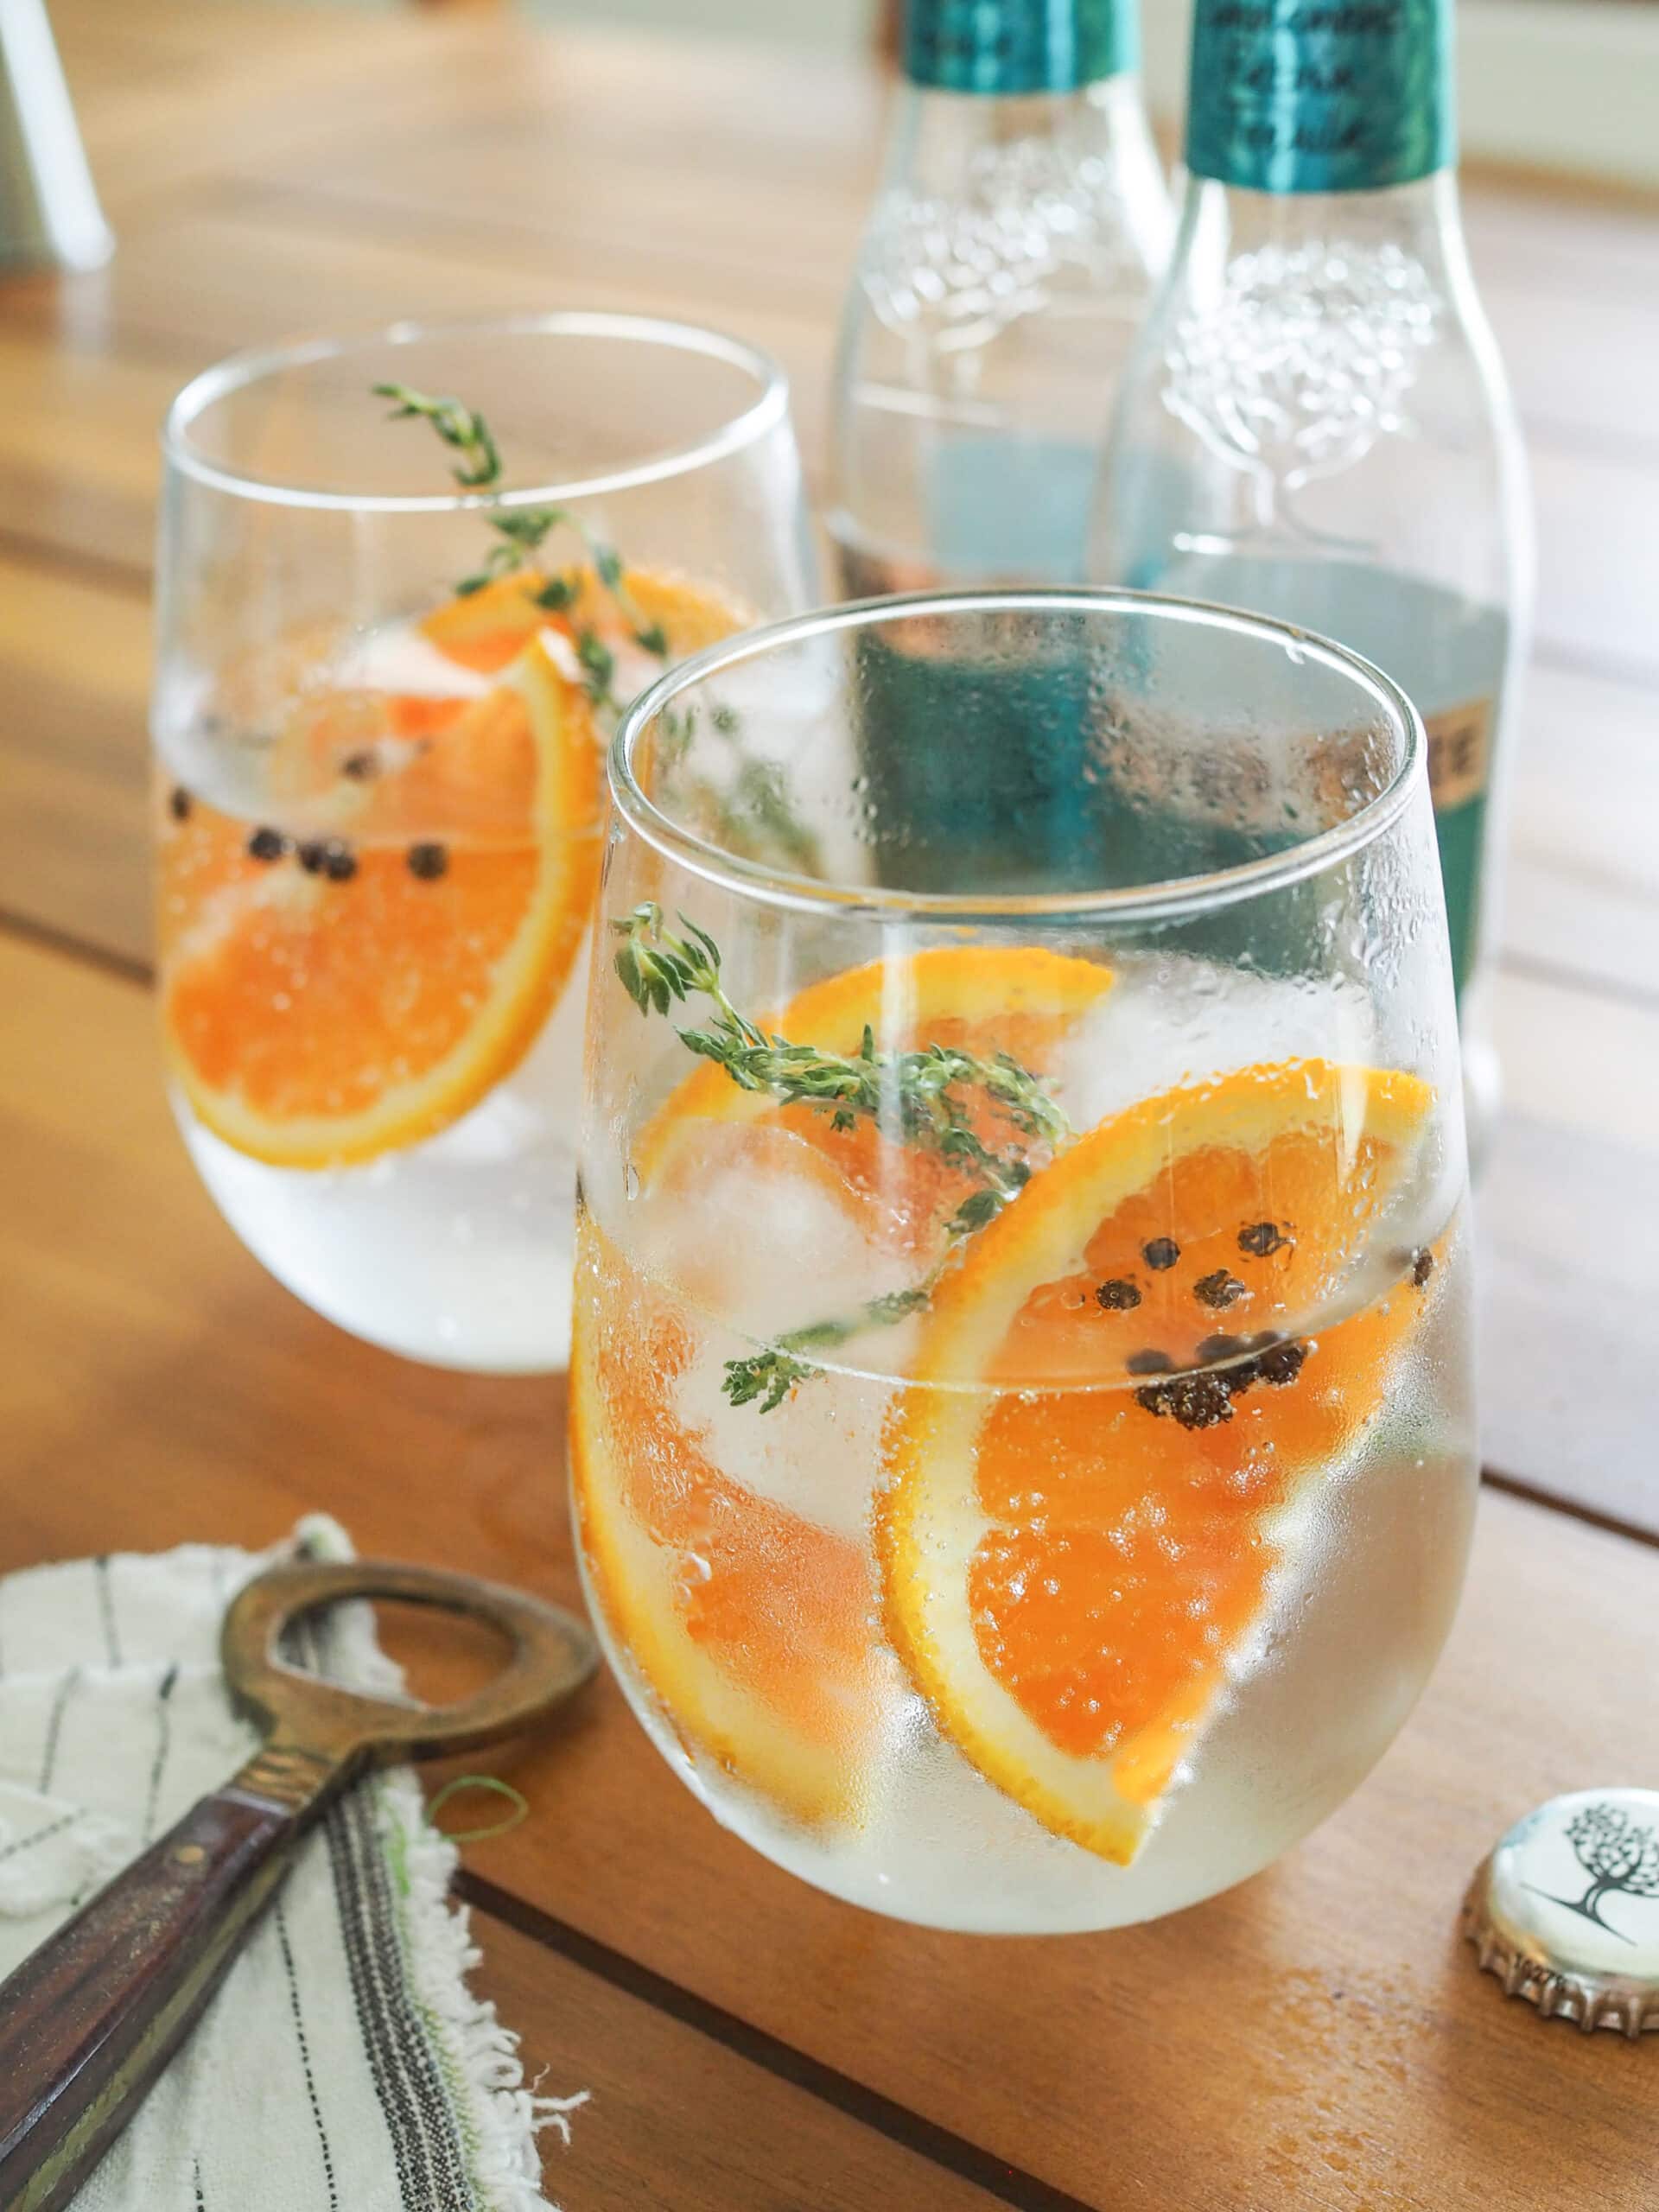 The Best Gin and Tonic Recipe